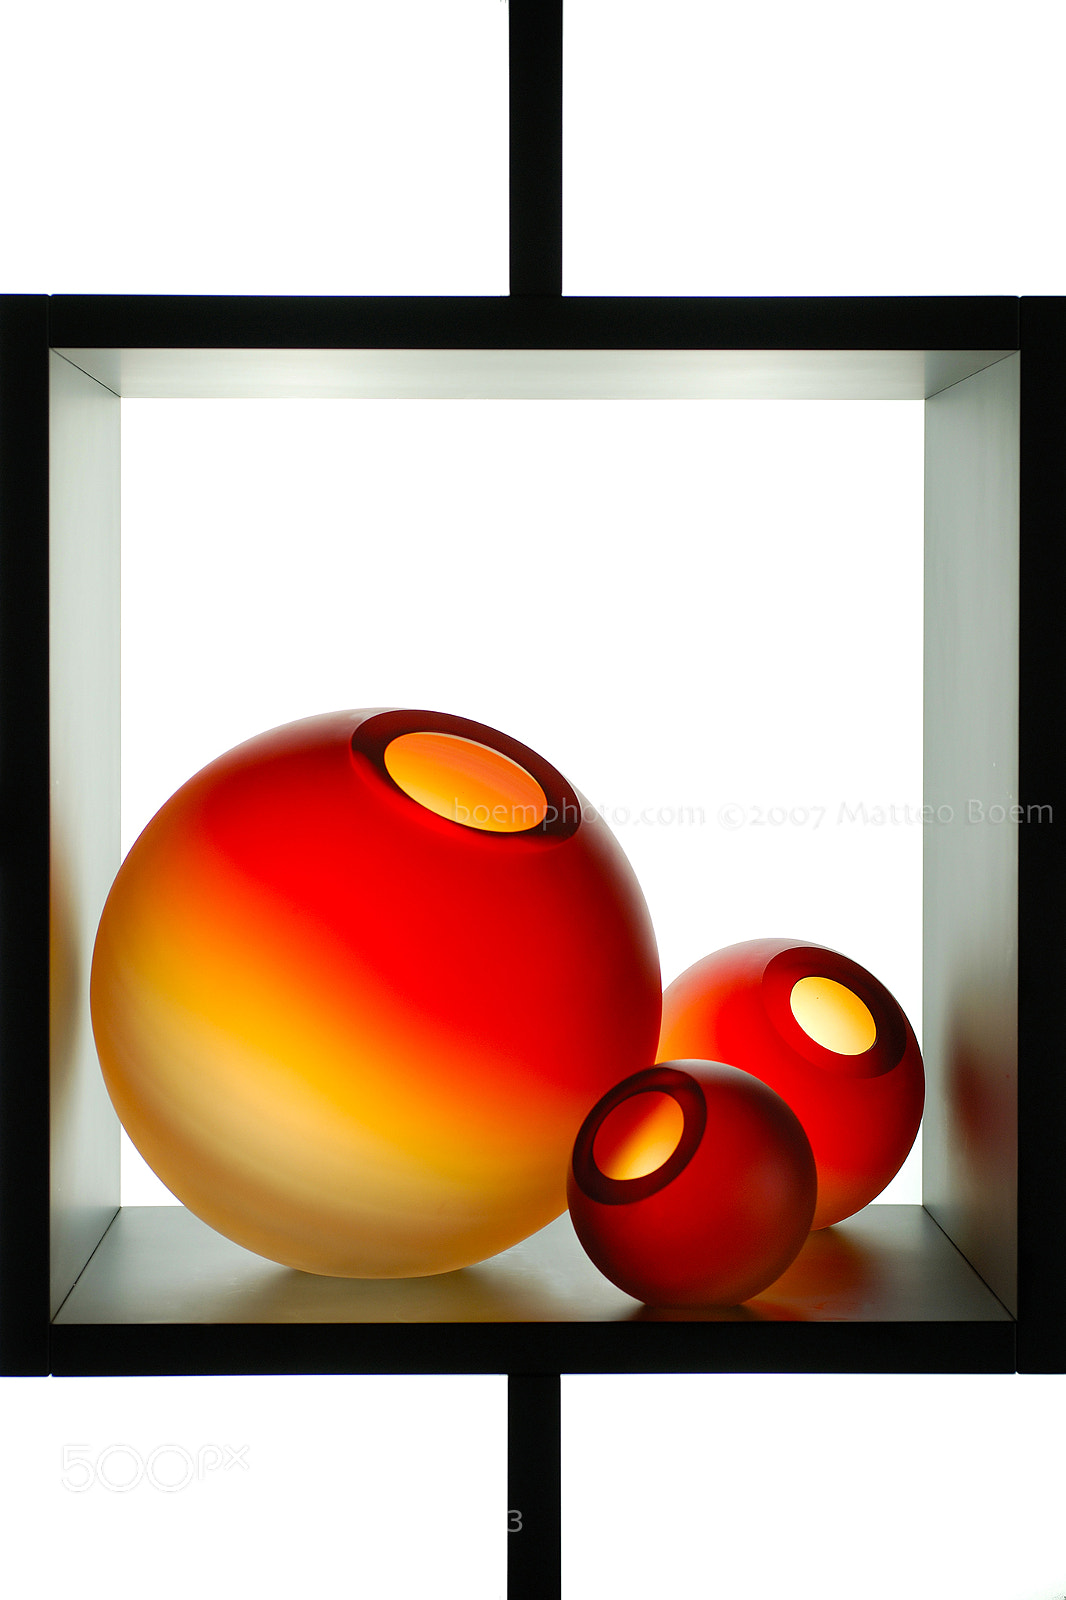 Nikon D200 sample photo. Murano glass complements photography